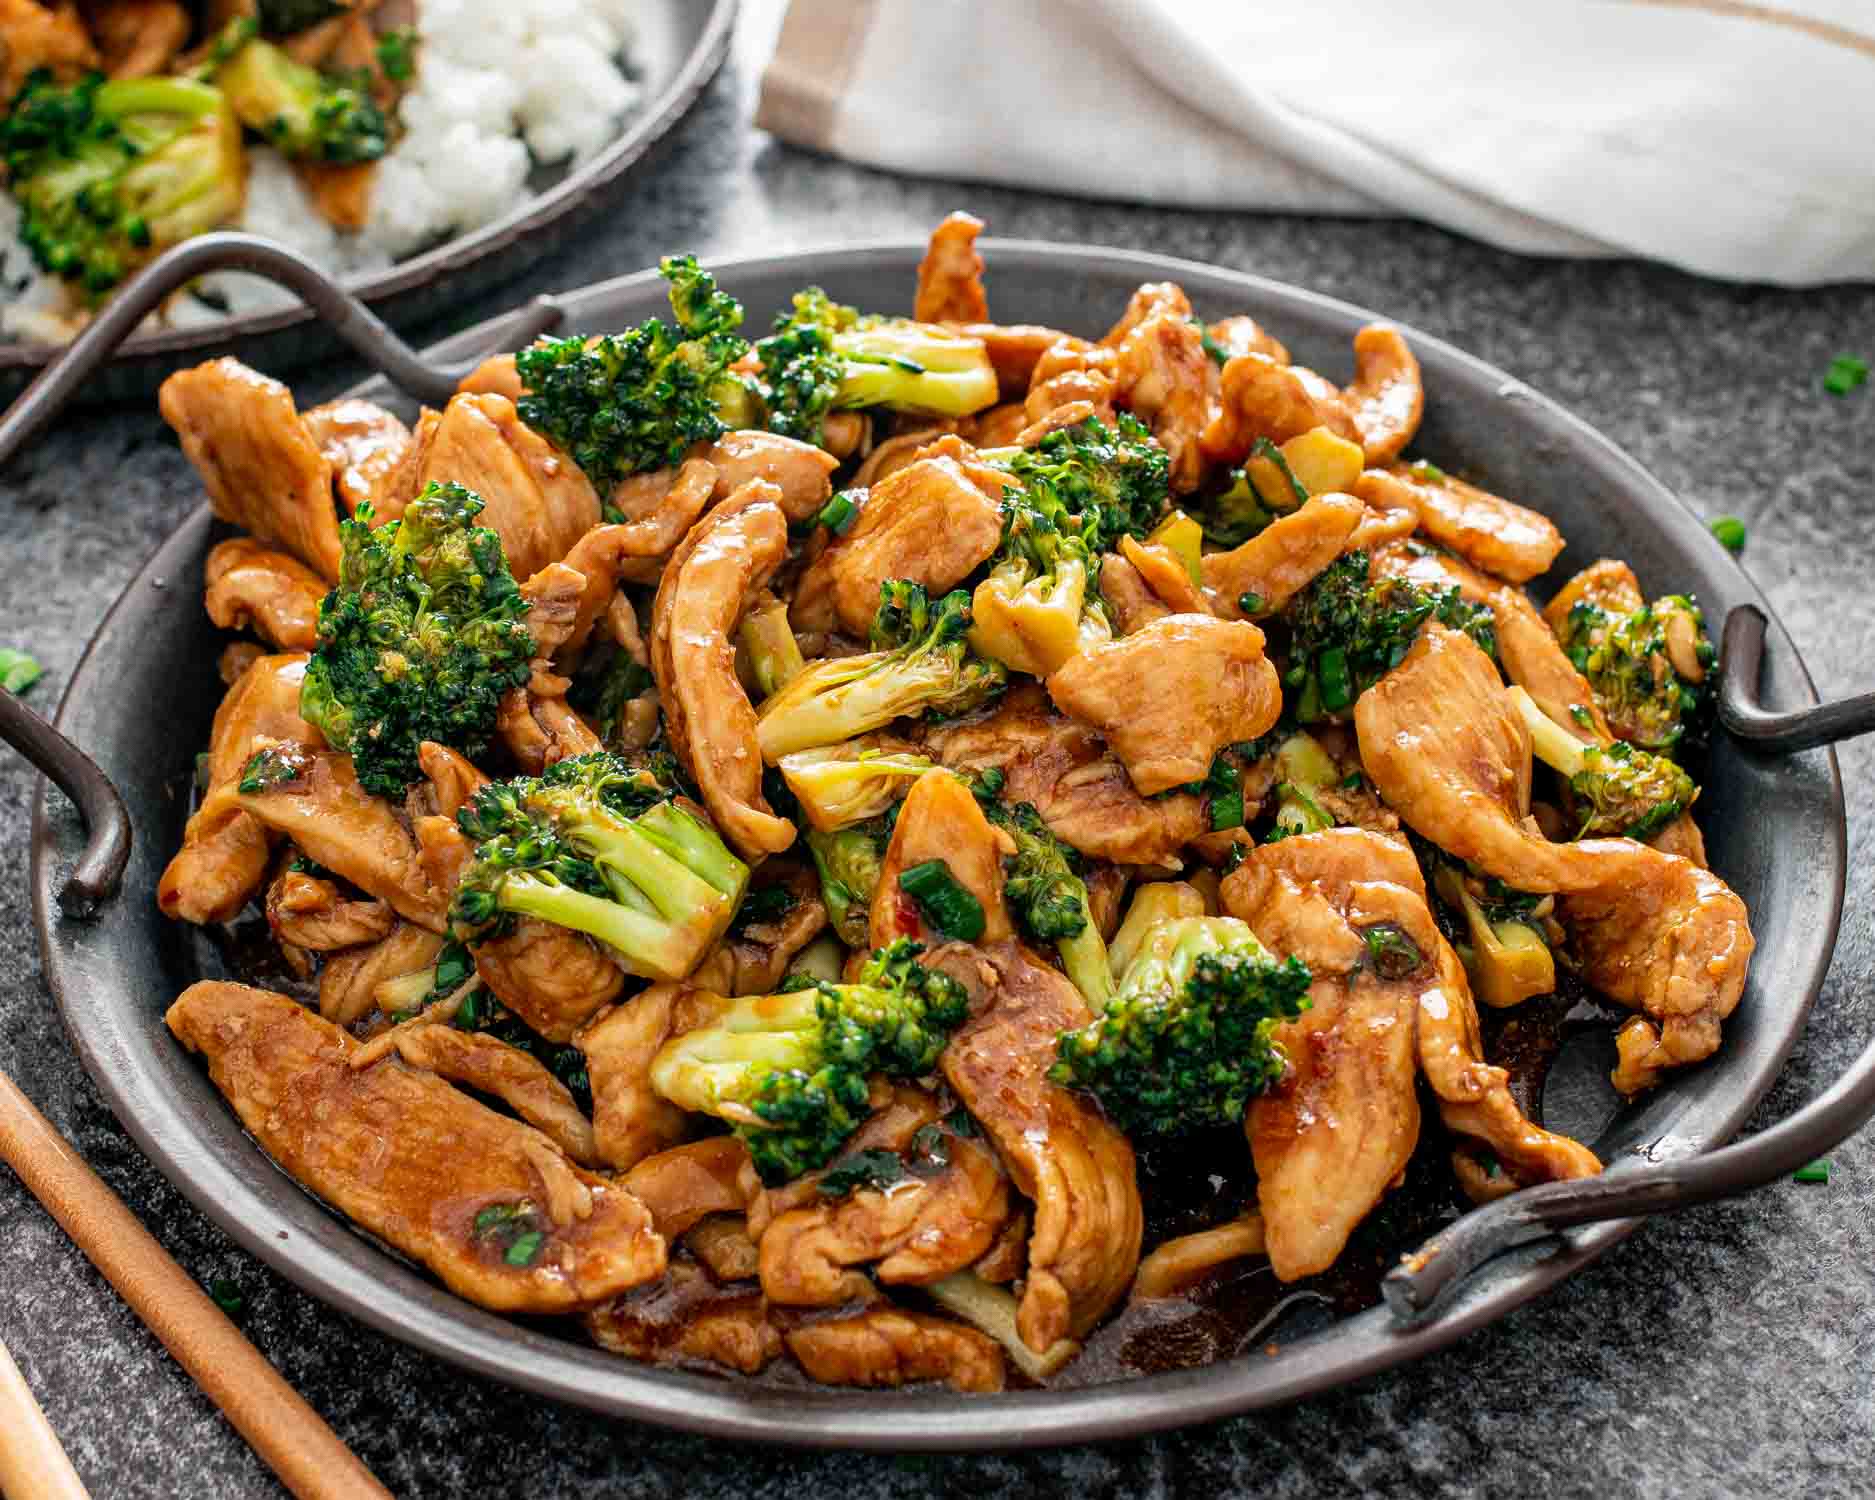 freshly made asian style chicken and broccoli on a metal plate.